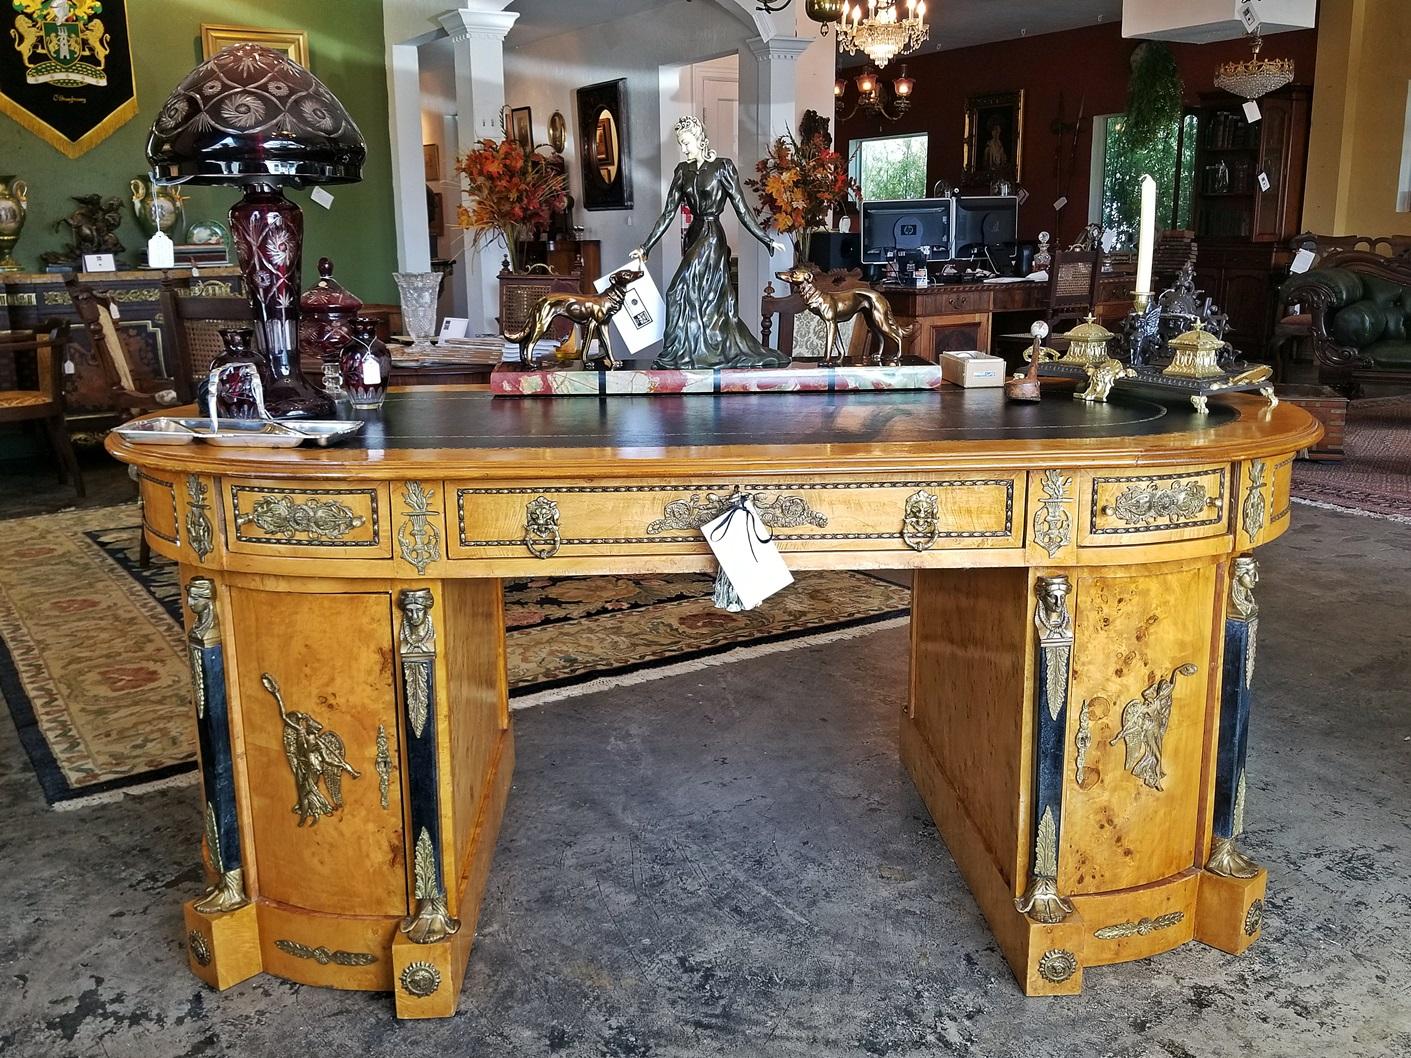 Beautiful French neoclassical revival style partners desk.
Probable made in the early 20th century, circa 1920 in the Empire style, with neoclassical influences. Made of rare burr yew wood, with a gorgeous yellow-brown patina. Ormolu mounts and